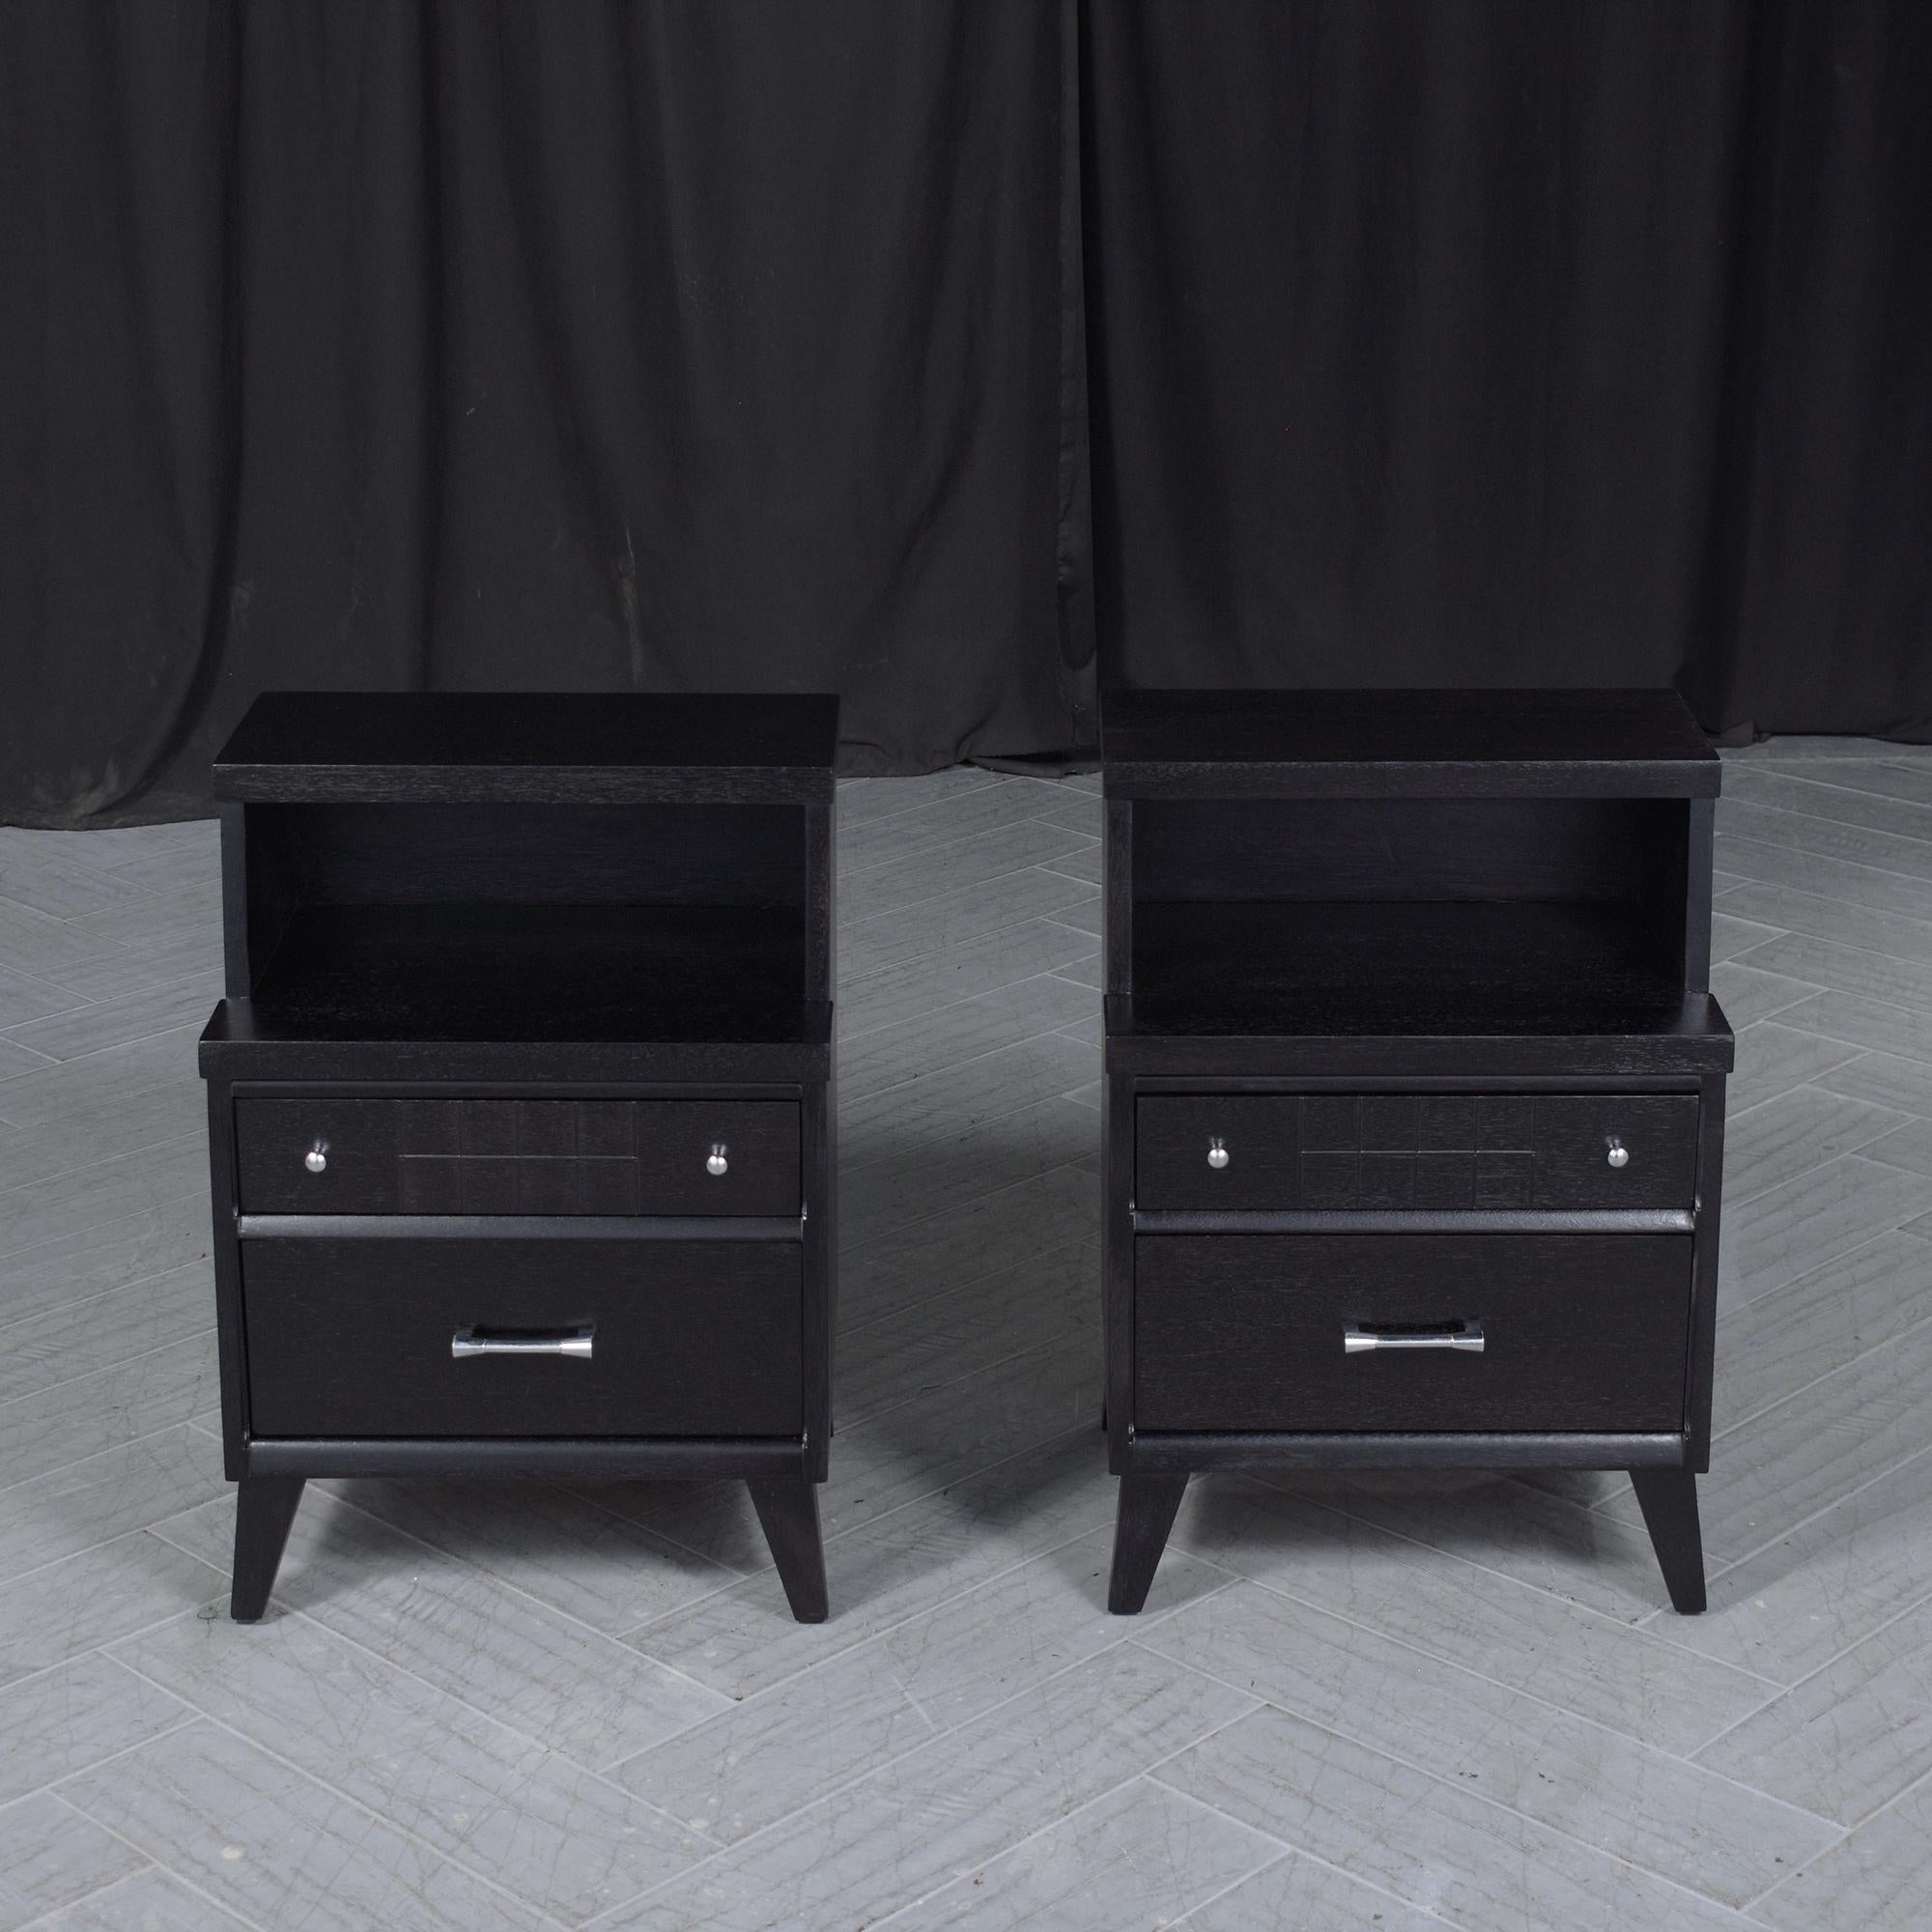 Step into the world of mid-century elegance with our beautifully restored Mid-Century Modern Nightstands. Skillfully brought back to their original splendor by our skilled craftsmen, these pieces perfectly blend vintage charm with modern refinement.